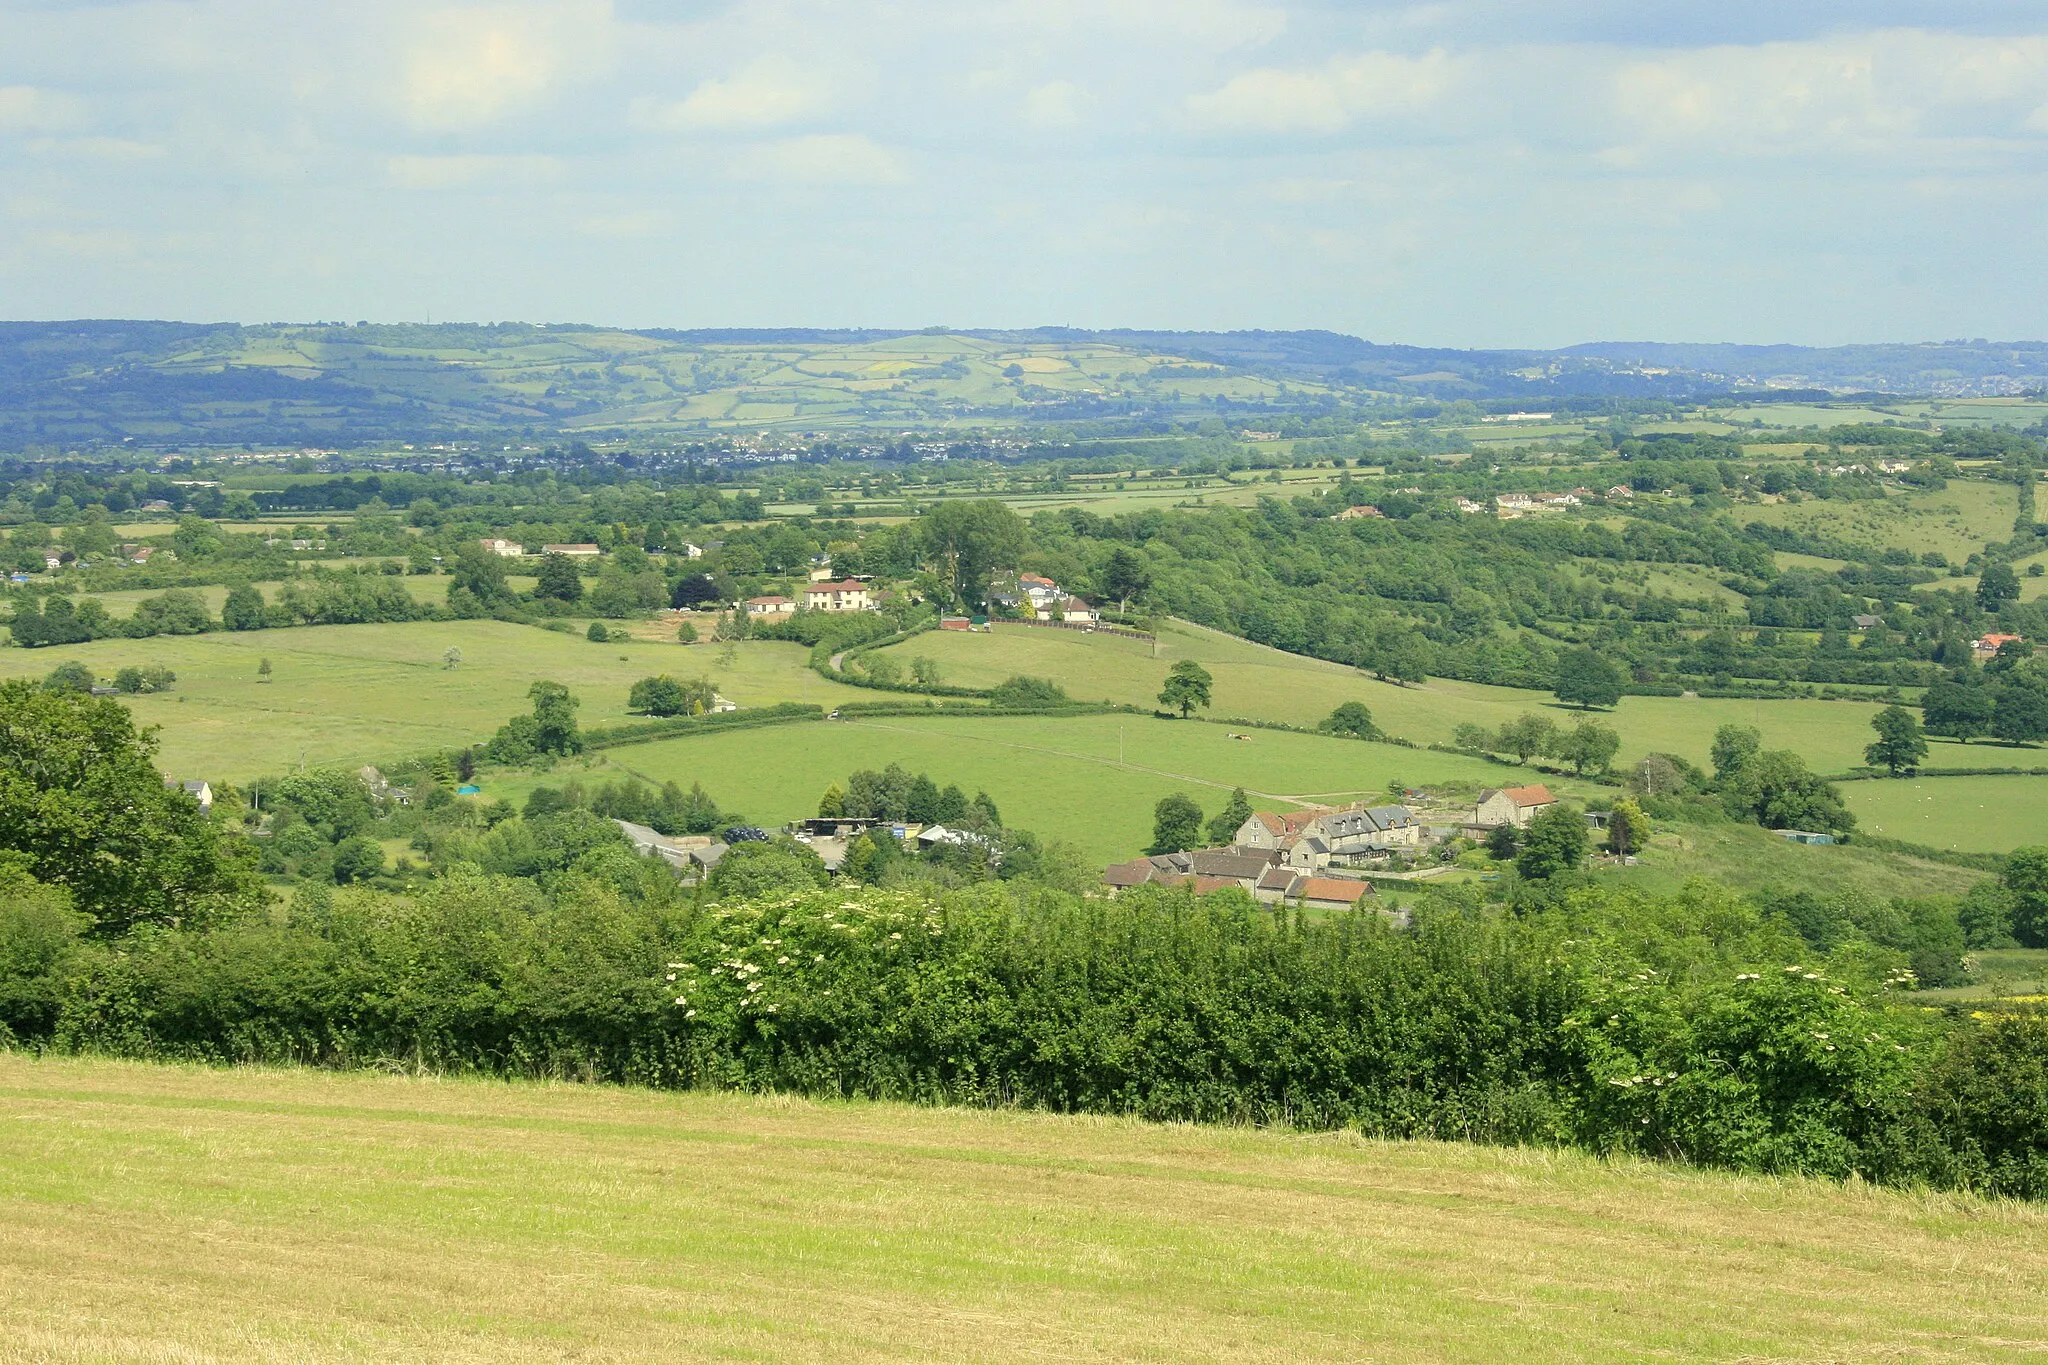 Photo showing: East from Maes Knoll The eastern edge of the hill fort is in the foreground. New Barn Farm is to the right just above the hedgerow. Then houses at the top of Hursley Hill.
Lansdown is on the horizon with Beckford's Tower which you can almost see in this image.
Beckford's Tower ST7367 can be seen in the larger image.

------

"Legend gives us a pretty traditional and widespread 'earth from the spade' story. The story goes that a giant called Gorm (uuuum, Gorm? Gormless?) was wandering around with a load of earth on his spade. Not remembering what it was for he dumped it and made the tump on Maes Knoll."

Copied from: http://www.themodernantiquarian.com/site/2882/maes_knoll.html to which it was: Posted by pure joy